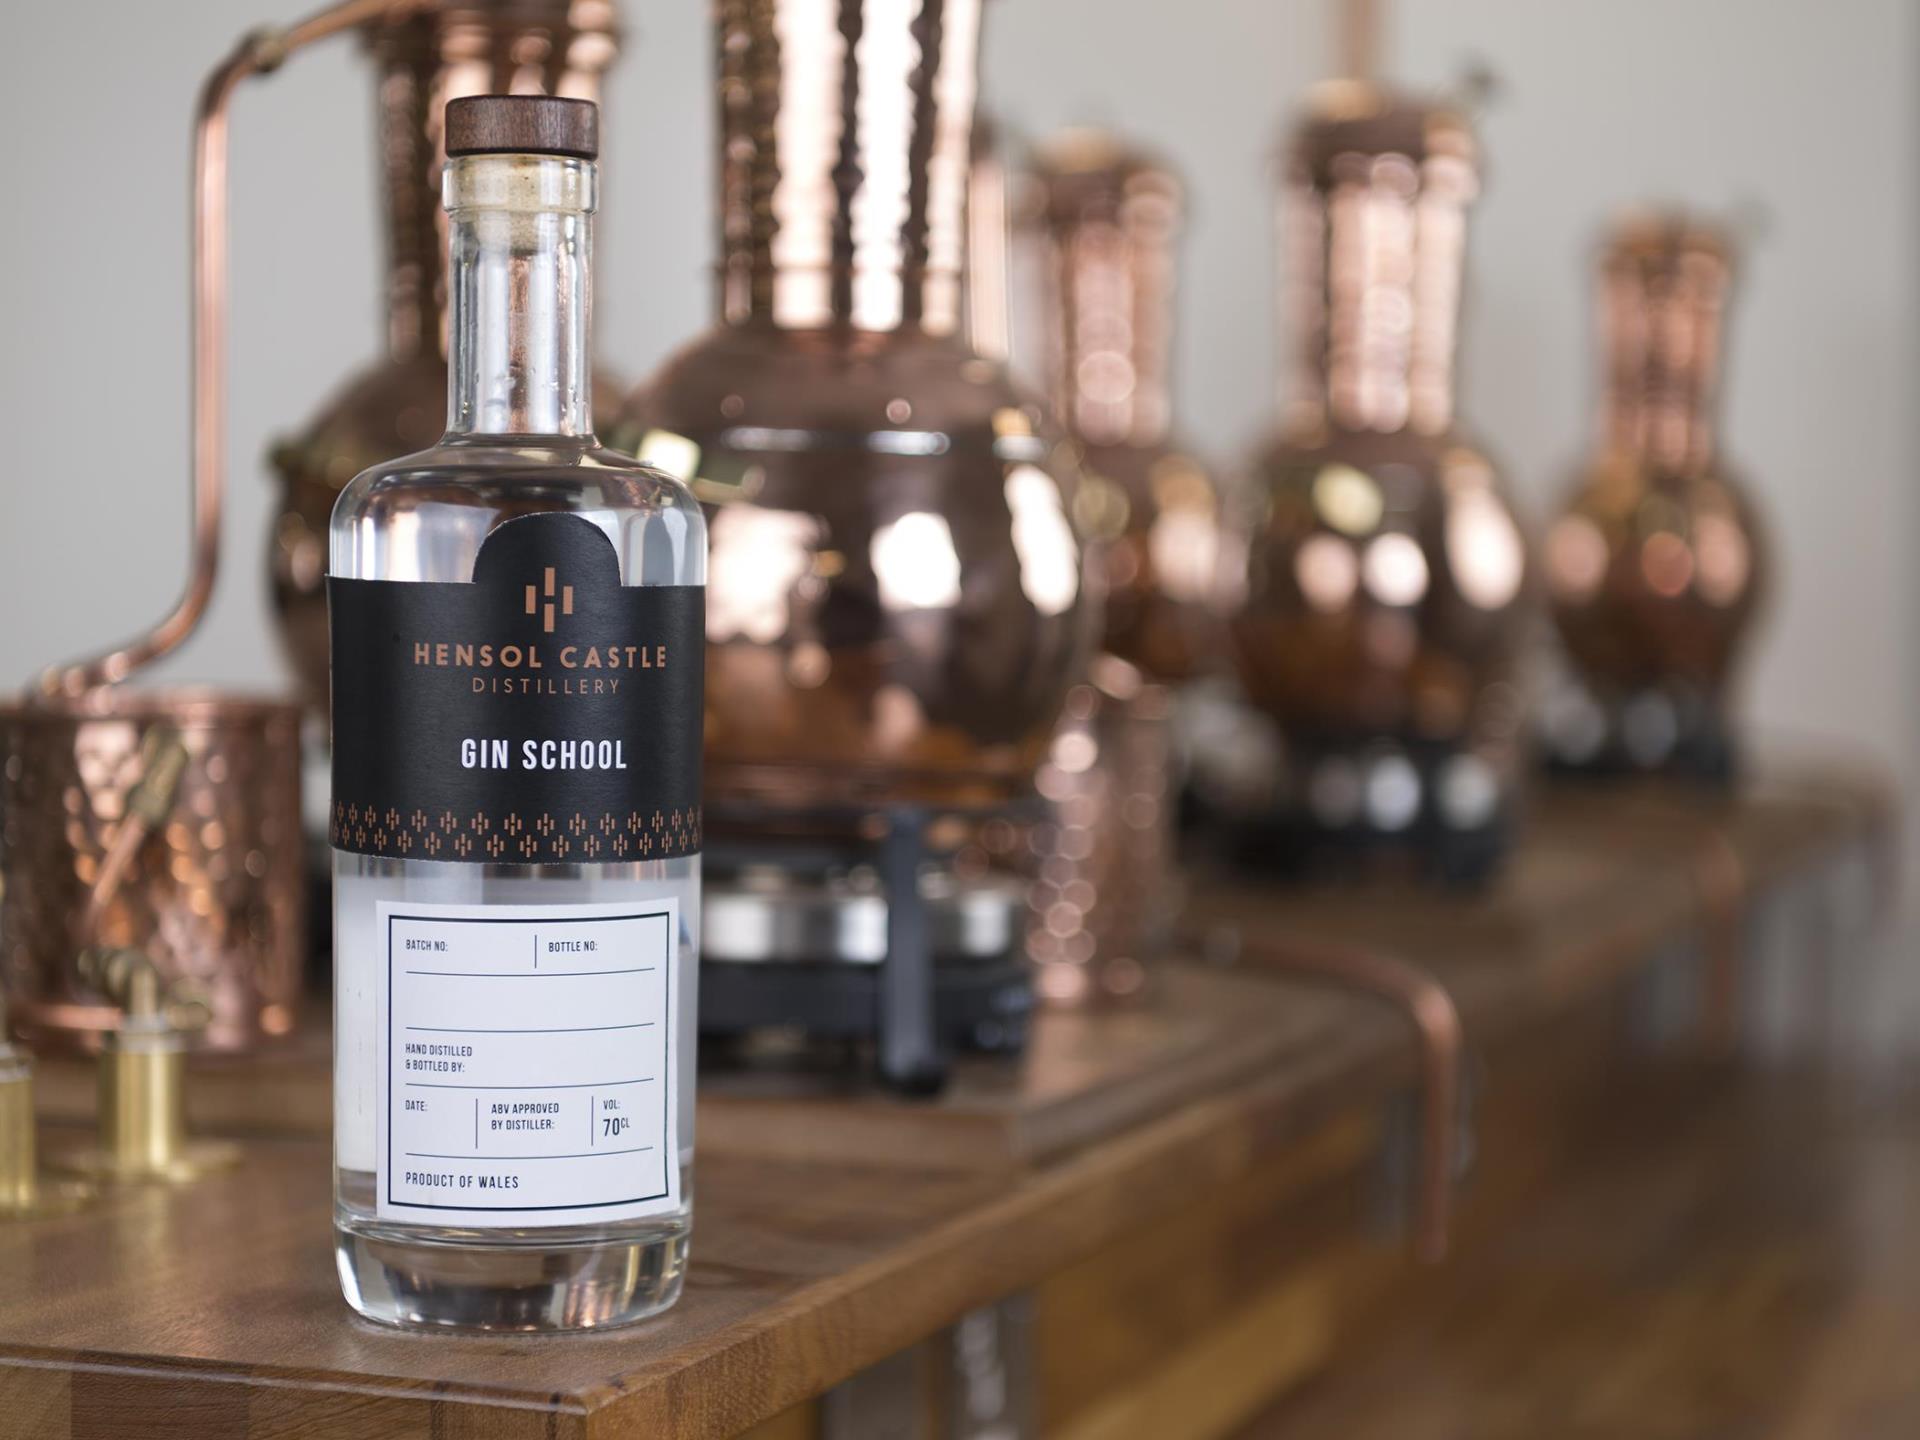 Make your own bottle of Gin in our Gin School